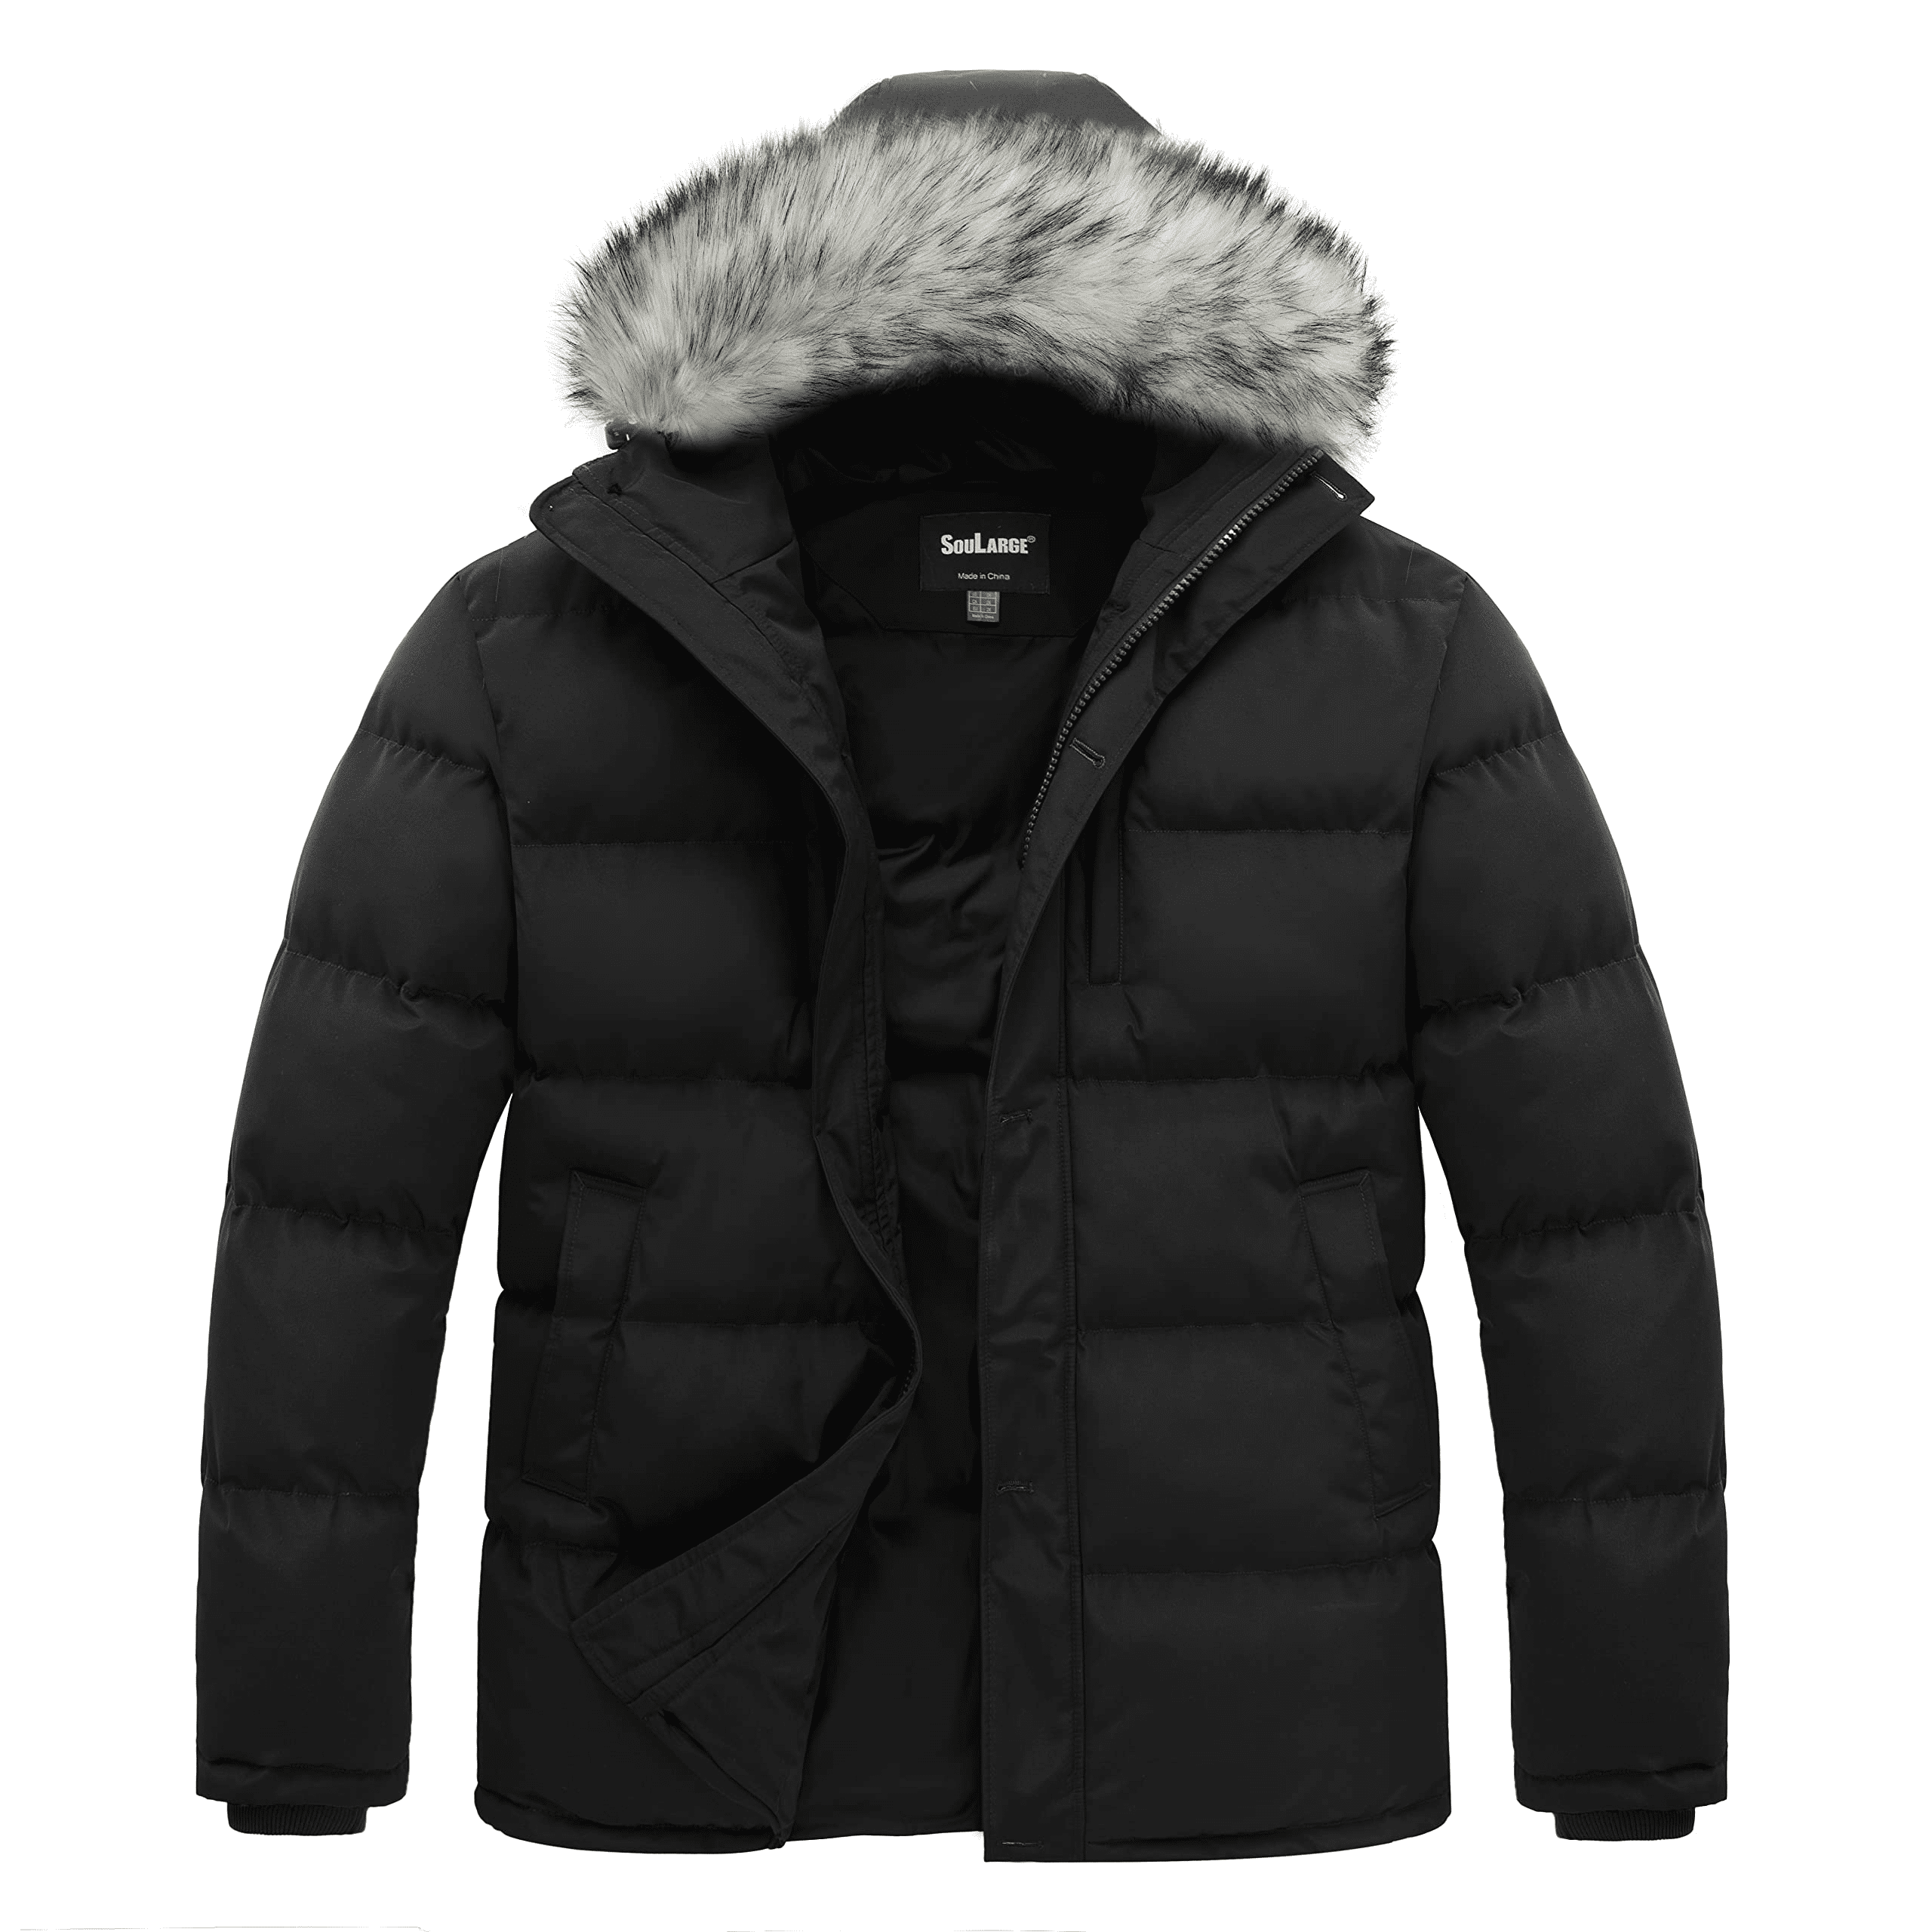 Soularge Men's Big and Tall Winter Water Resistant Hooded Puffer Coat ...